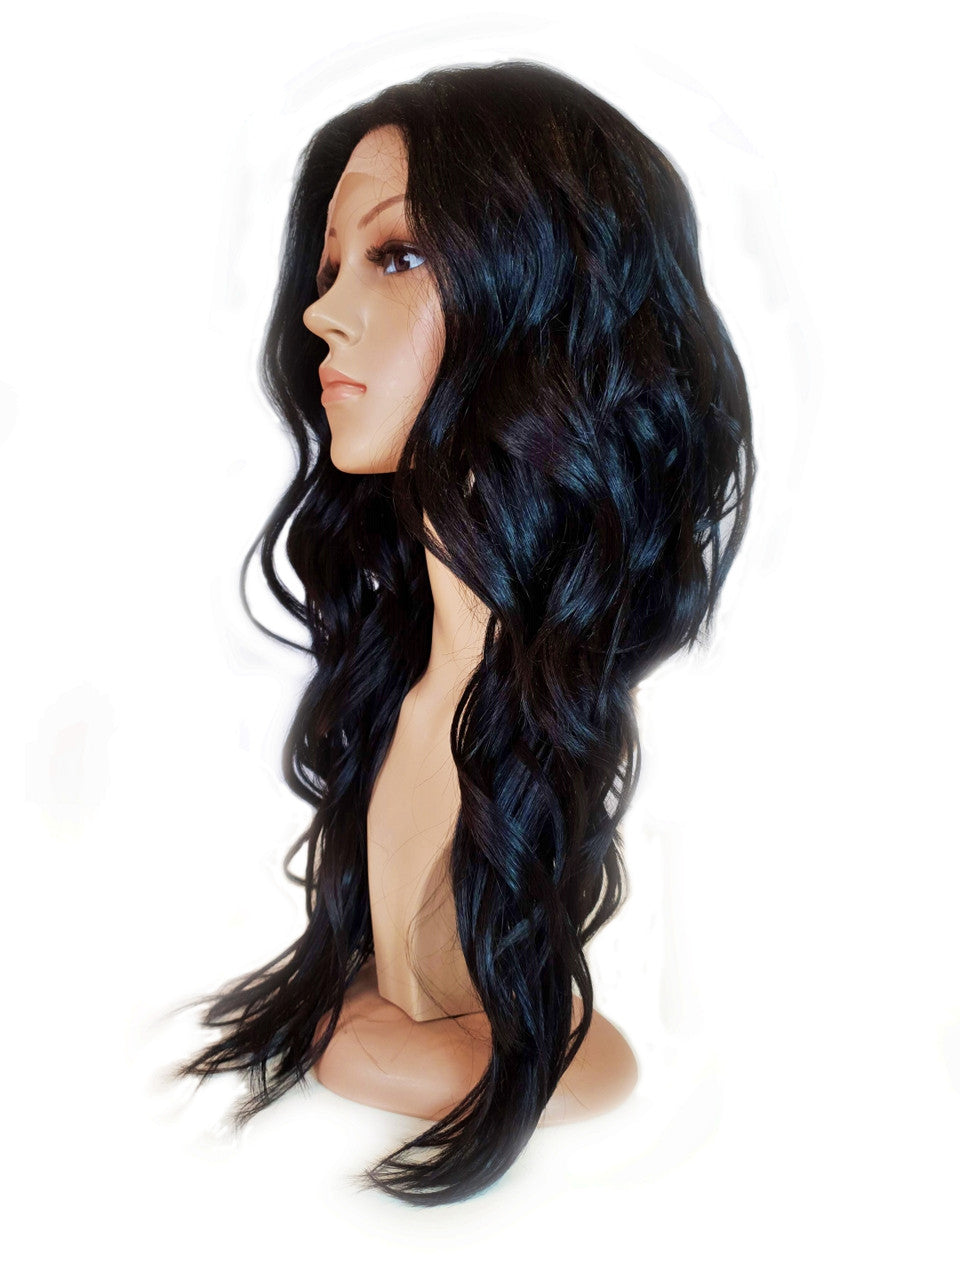 Tamsin Black Lace Front long waterfall wave texture wig.